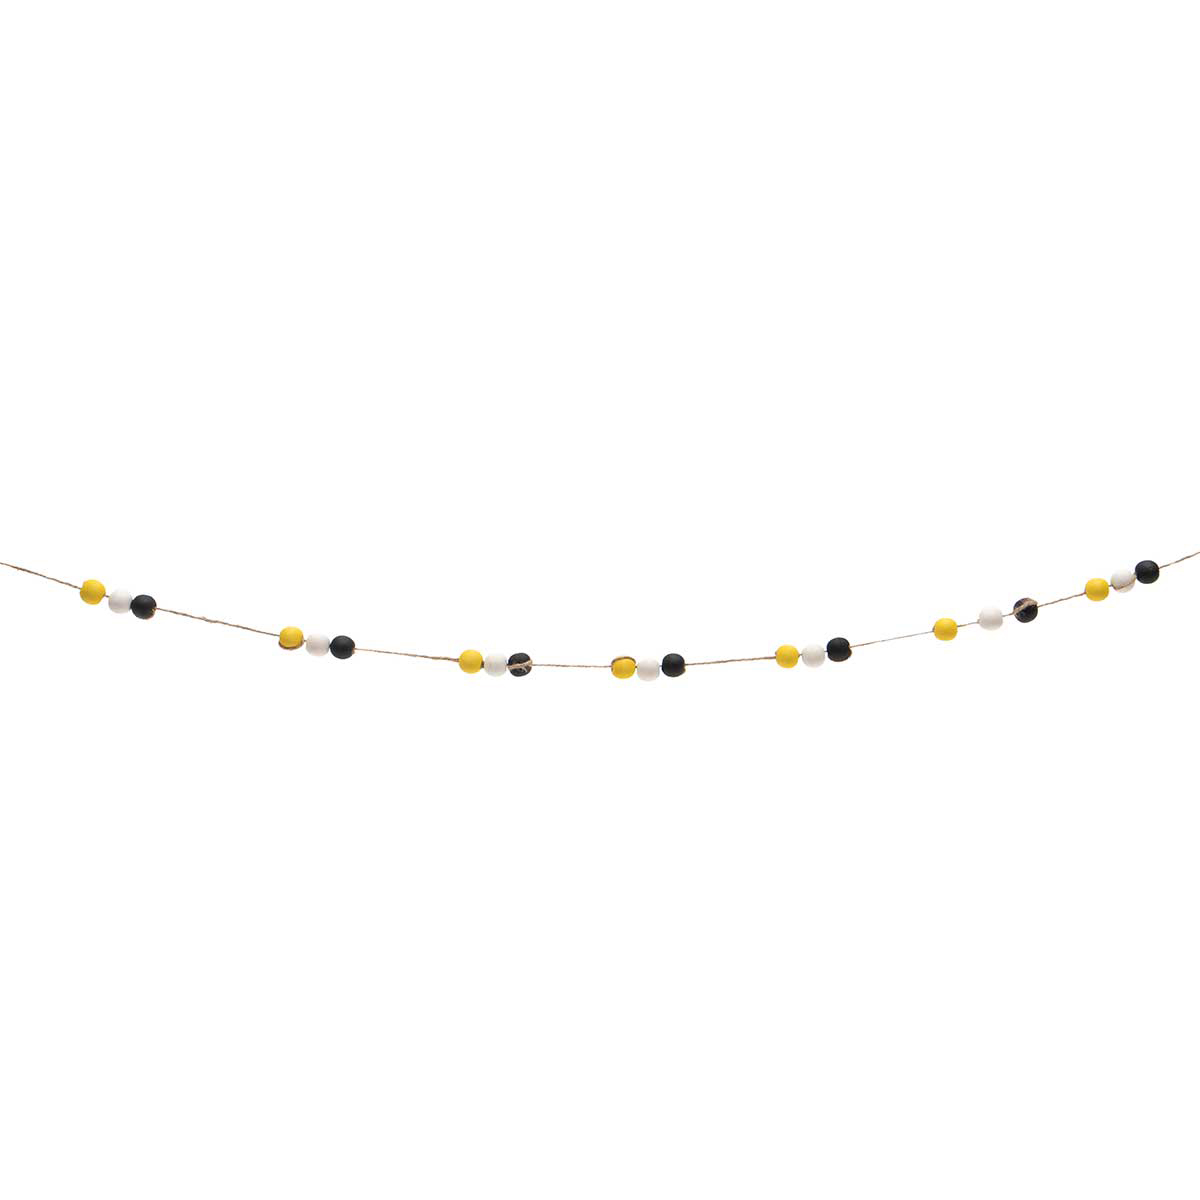 !Garland with Twine Hanger and 39 Beads